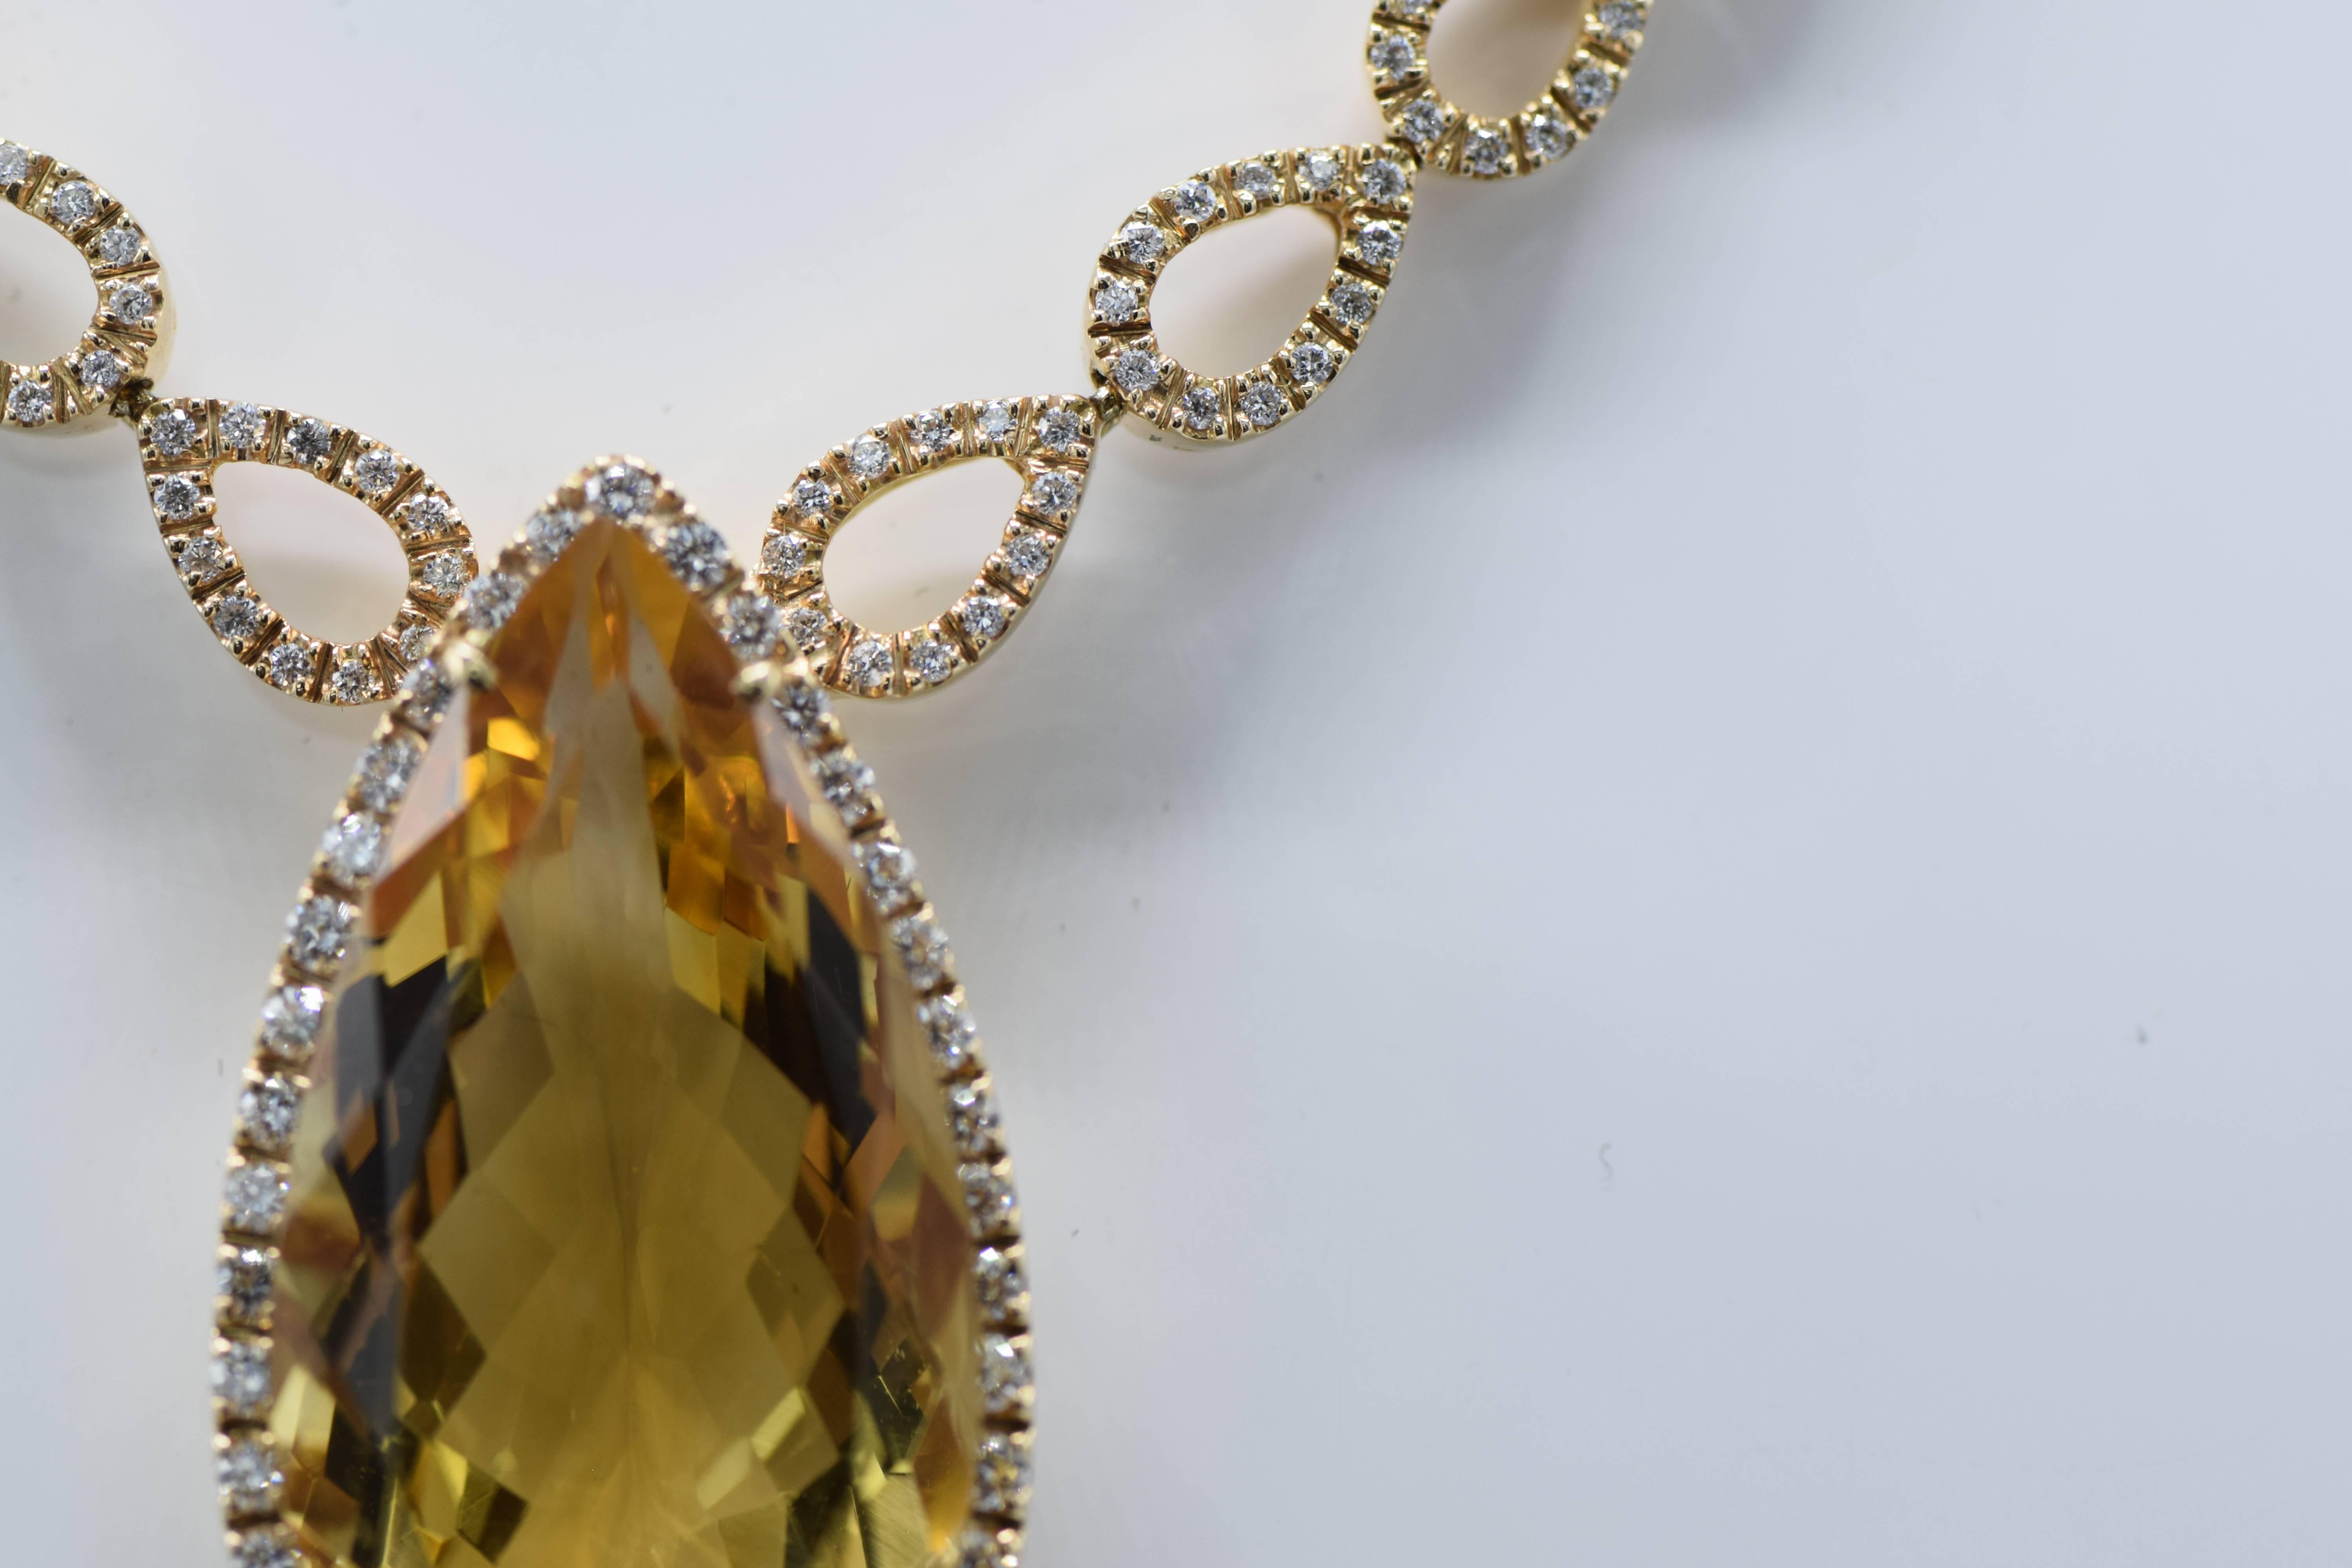 Suspending a pear-shaped citrine weighing approximately 26.00 carats, framed by a border of round diamonds, joined to diamond-set and polished pear-shaped linking, mounted in 18k pink gold,

Citrine: a medium tone of golden yellow color 

Diamonds: